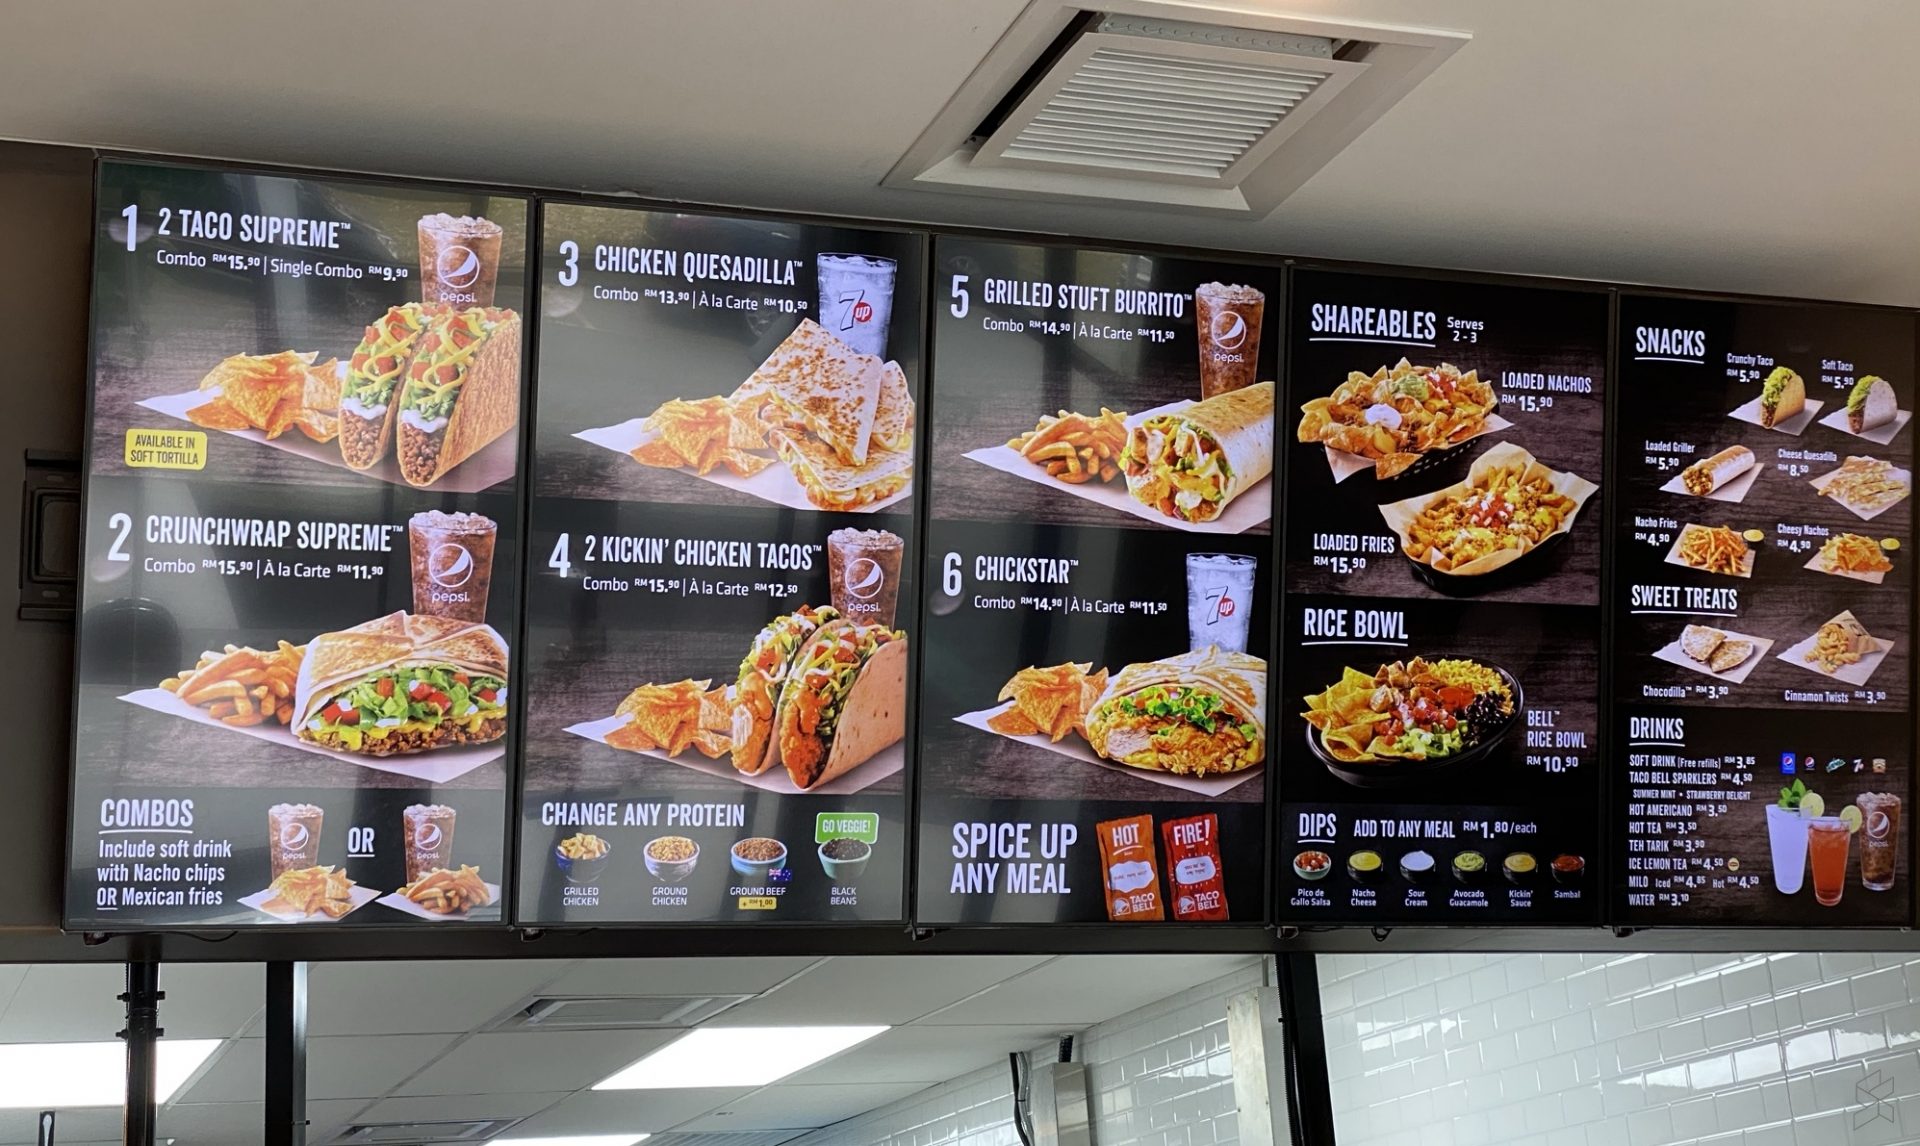 Here's a preview of Taco Bell Malaysia's first restaurant SoyaCincau